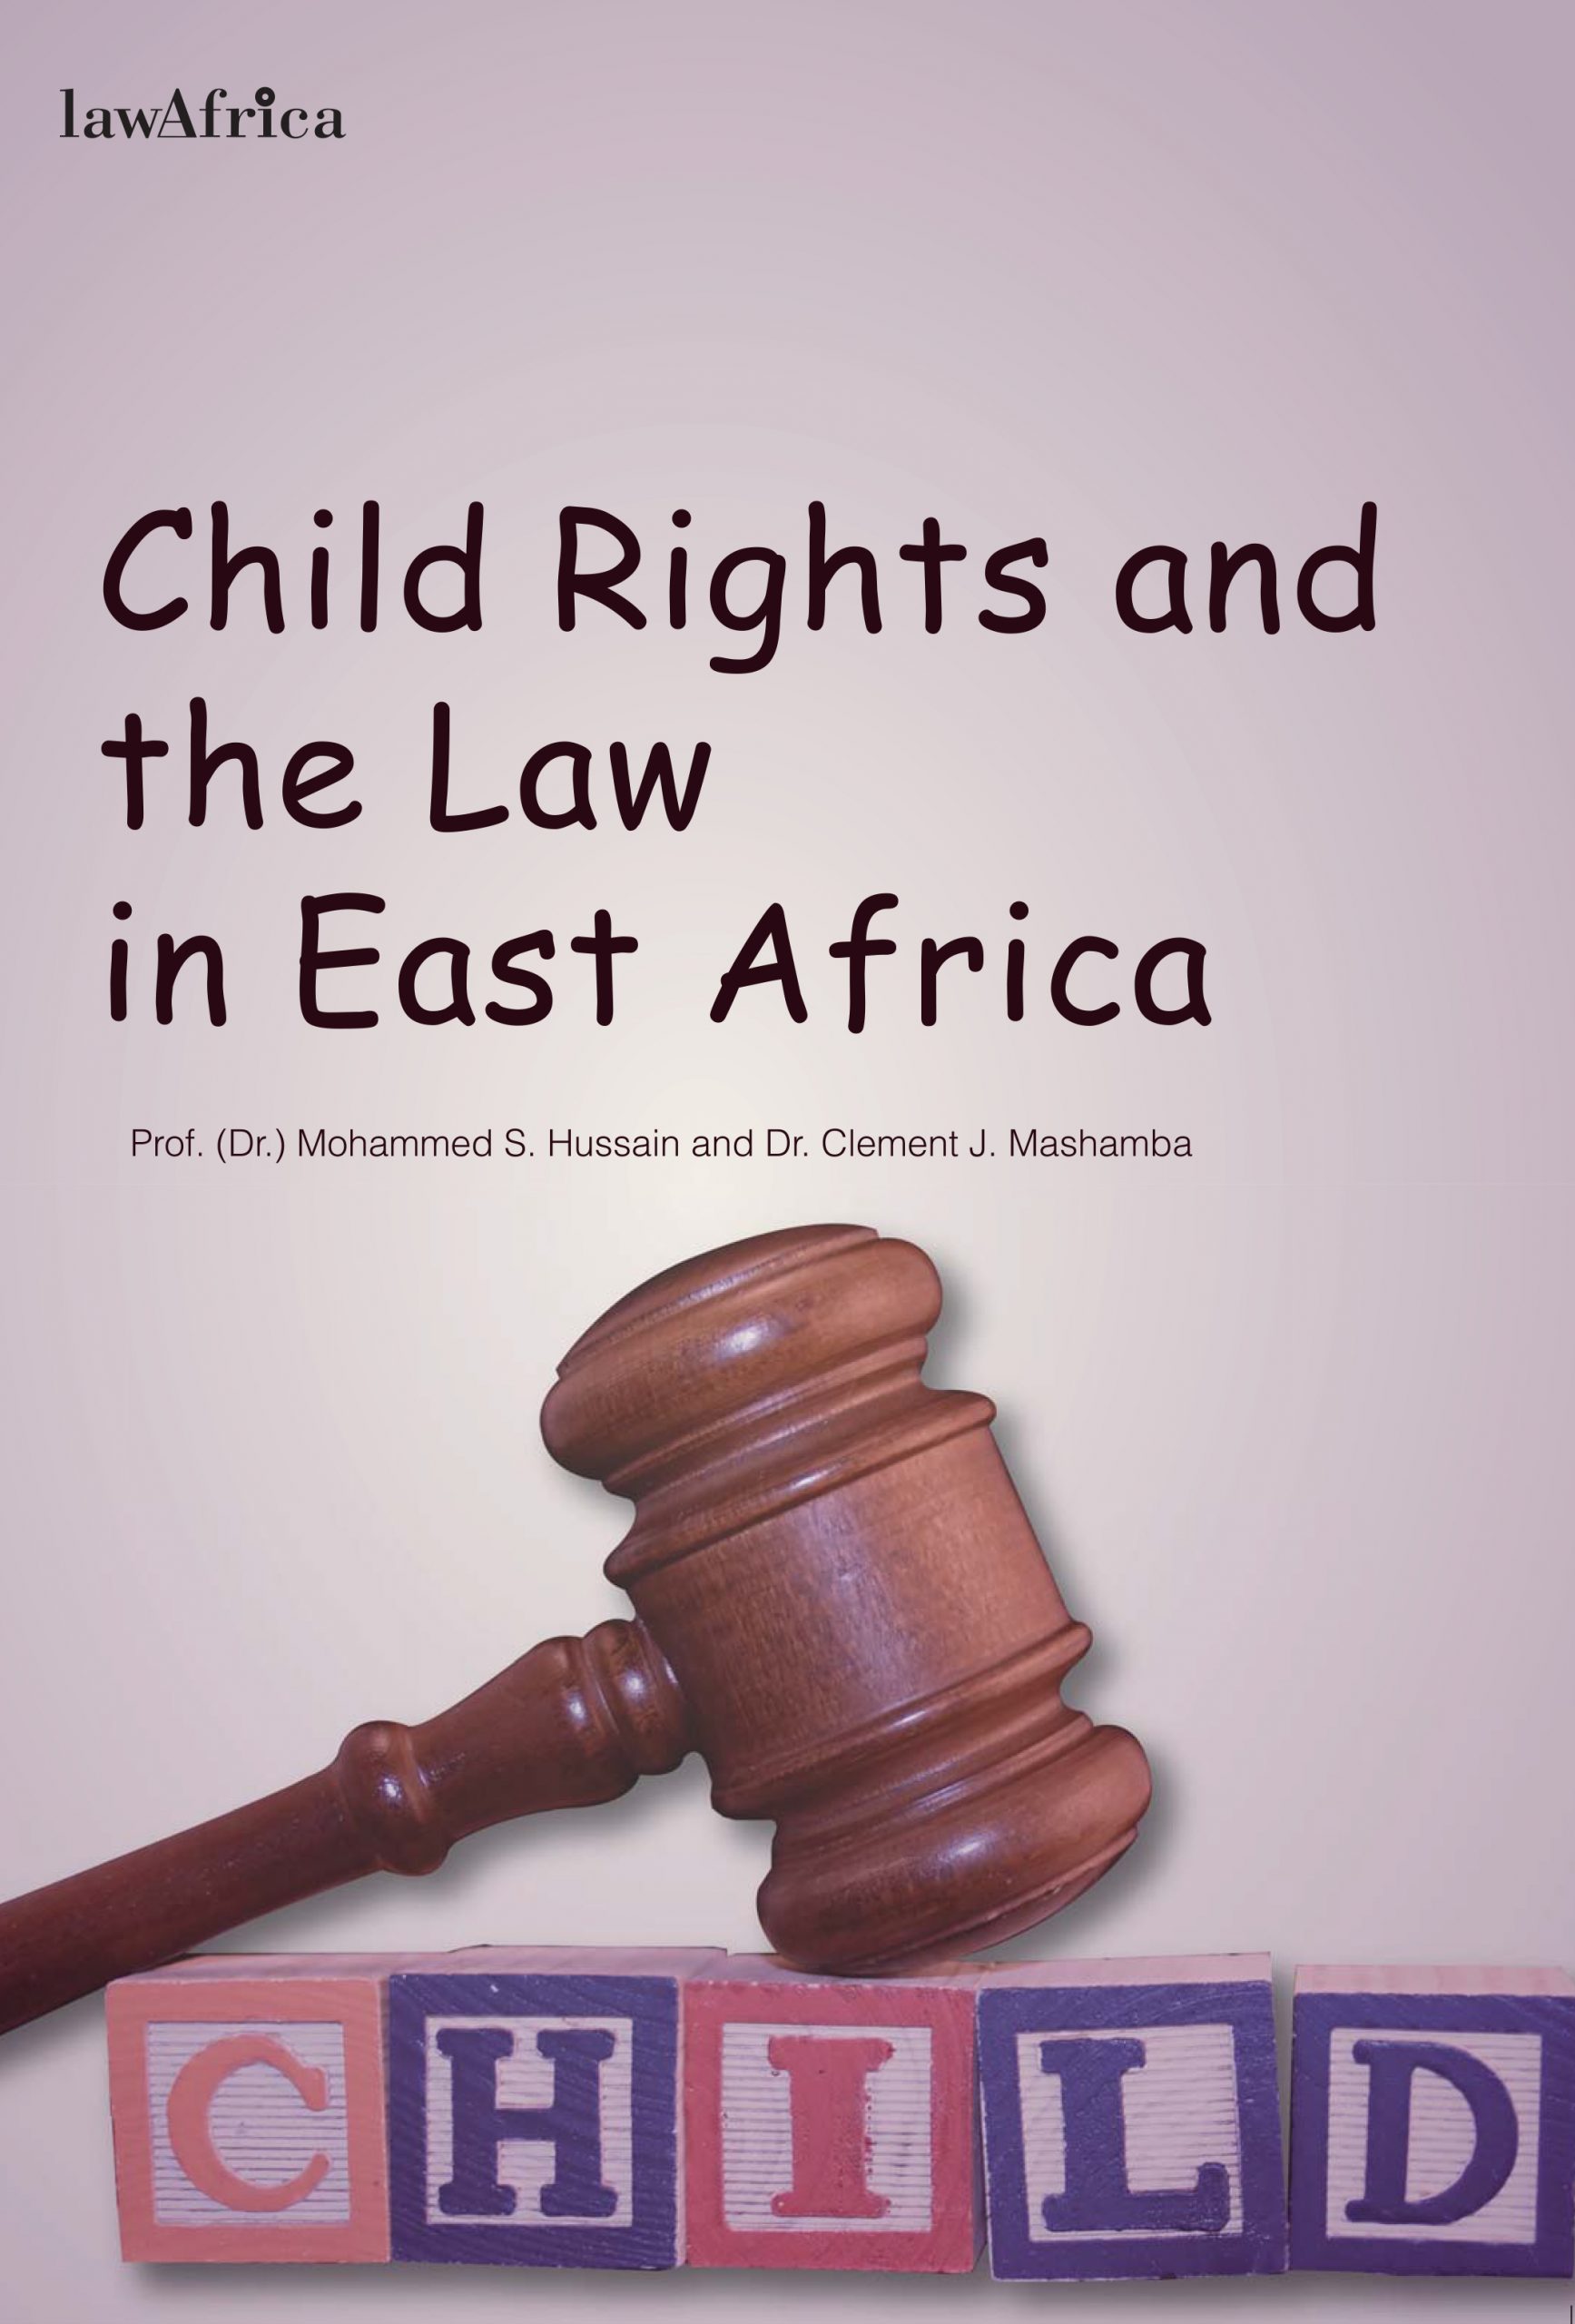 Child Rights and the Law in East Africa.ai